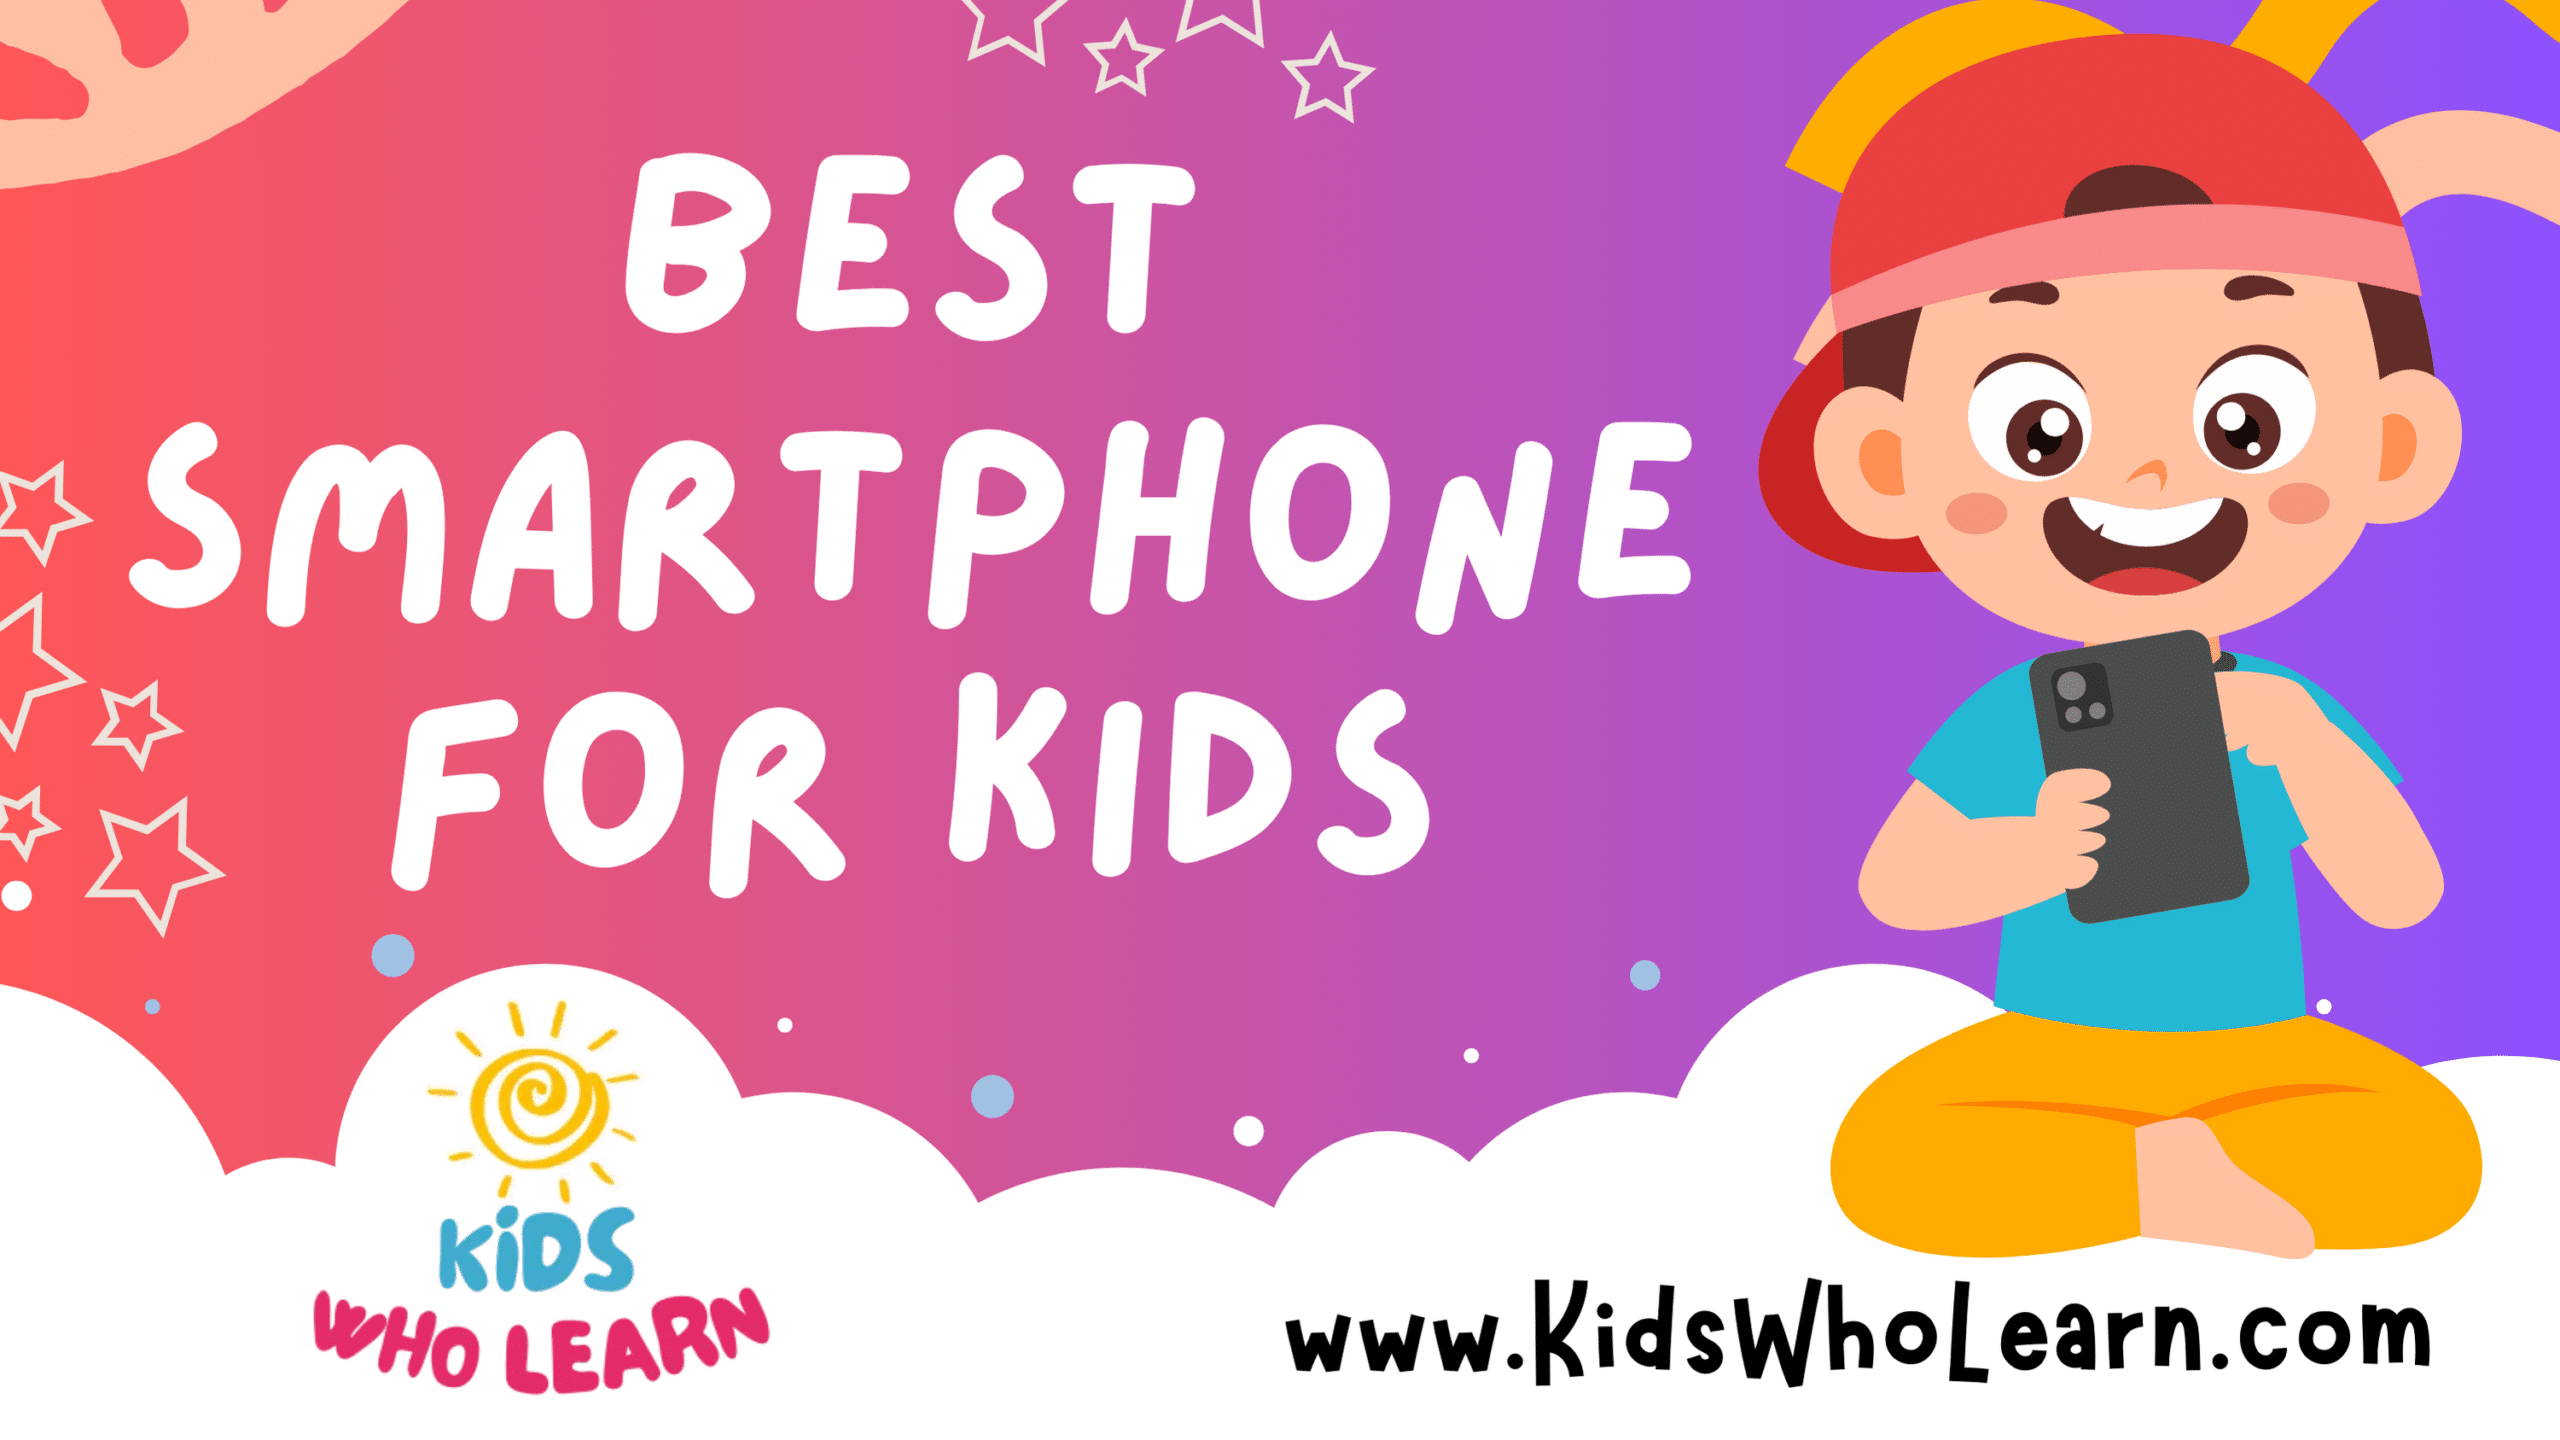 The Best Smartphone for Kids: Safety and Reliability